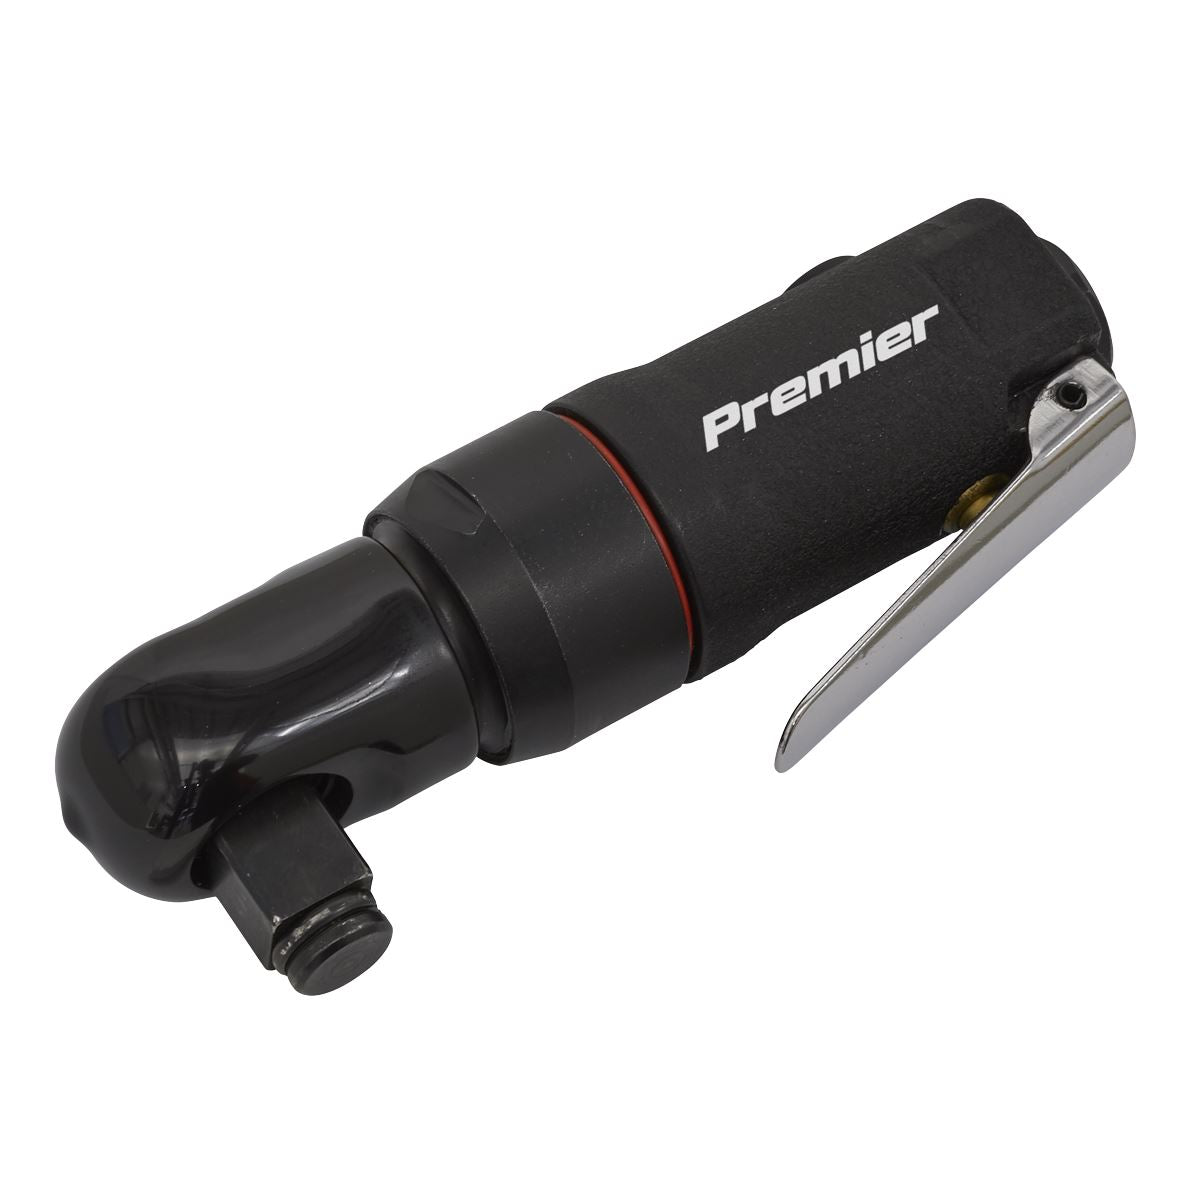 Sealey Premier 2-in-1 Mini Air Ratchet Wrench 1/4" & 1/2"Sq Drive